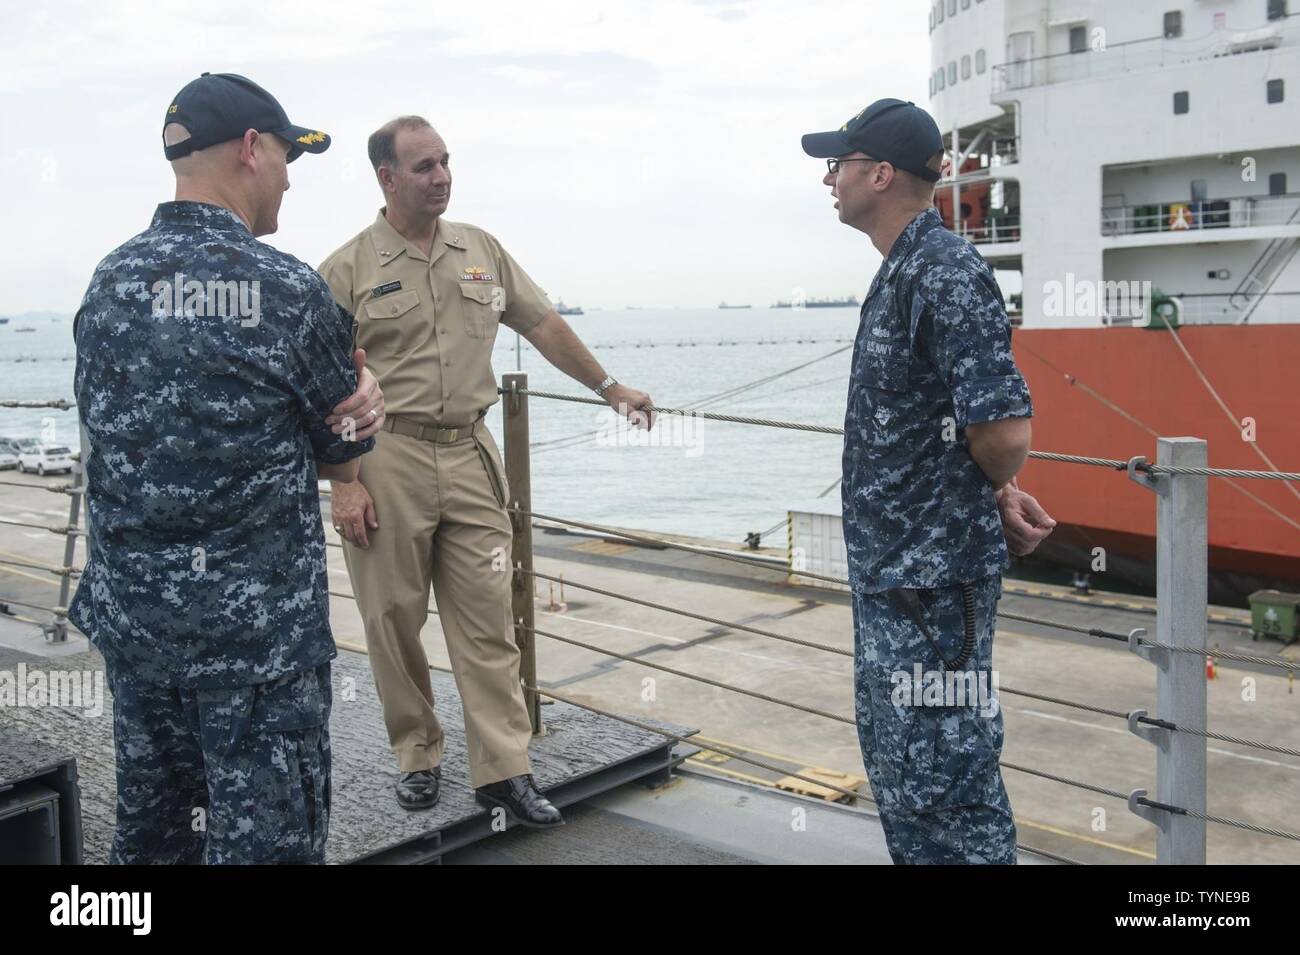 CHANGI NAVAL BASE, Singapore (November 18, 2016) Petty Officer 1st Class Jedediah Lamping explains the addition of the Harpoon missile to Rear Adm. John Weigold, deputy reserve commander, Pacific Fleet, during a tour aboard USS Coronado (LCS 4). Currently on a rotational deployment in support of the Asia-Pacific Rebalance, Coronado is a fast and agile warship tailor-made to patrol the region’s littorals and work hull-to-hull with partner navies, providing 7th Fleet with the flexible capabilities it needs now and in the future. Stock Photo